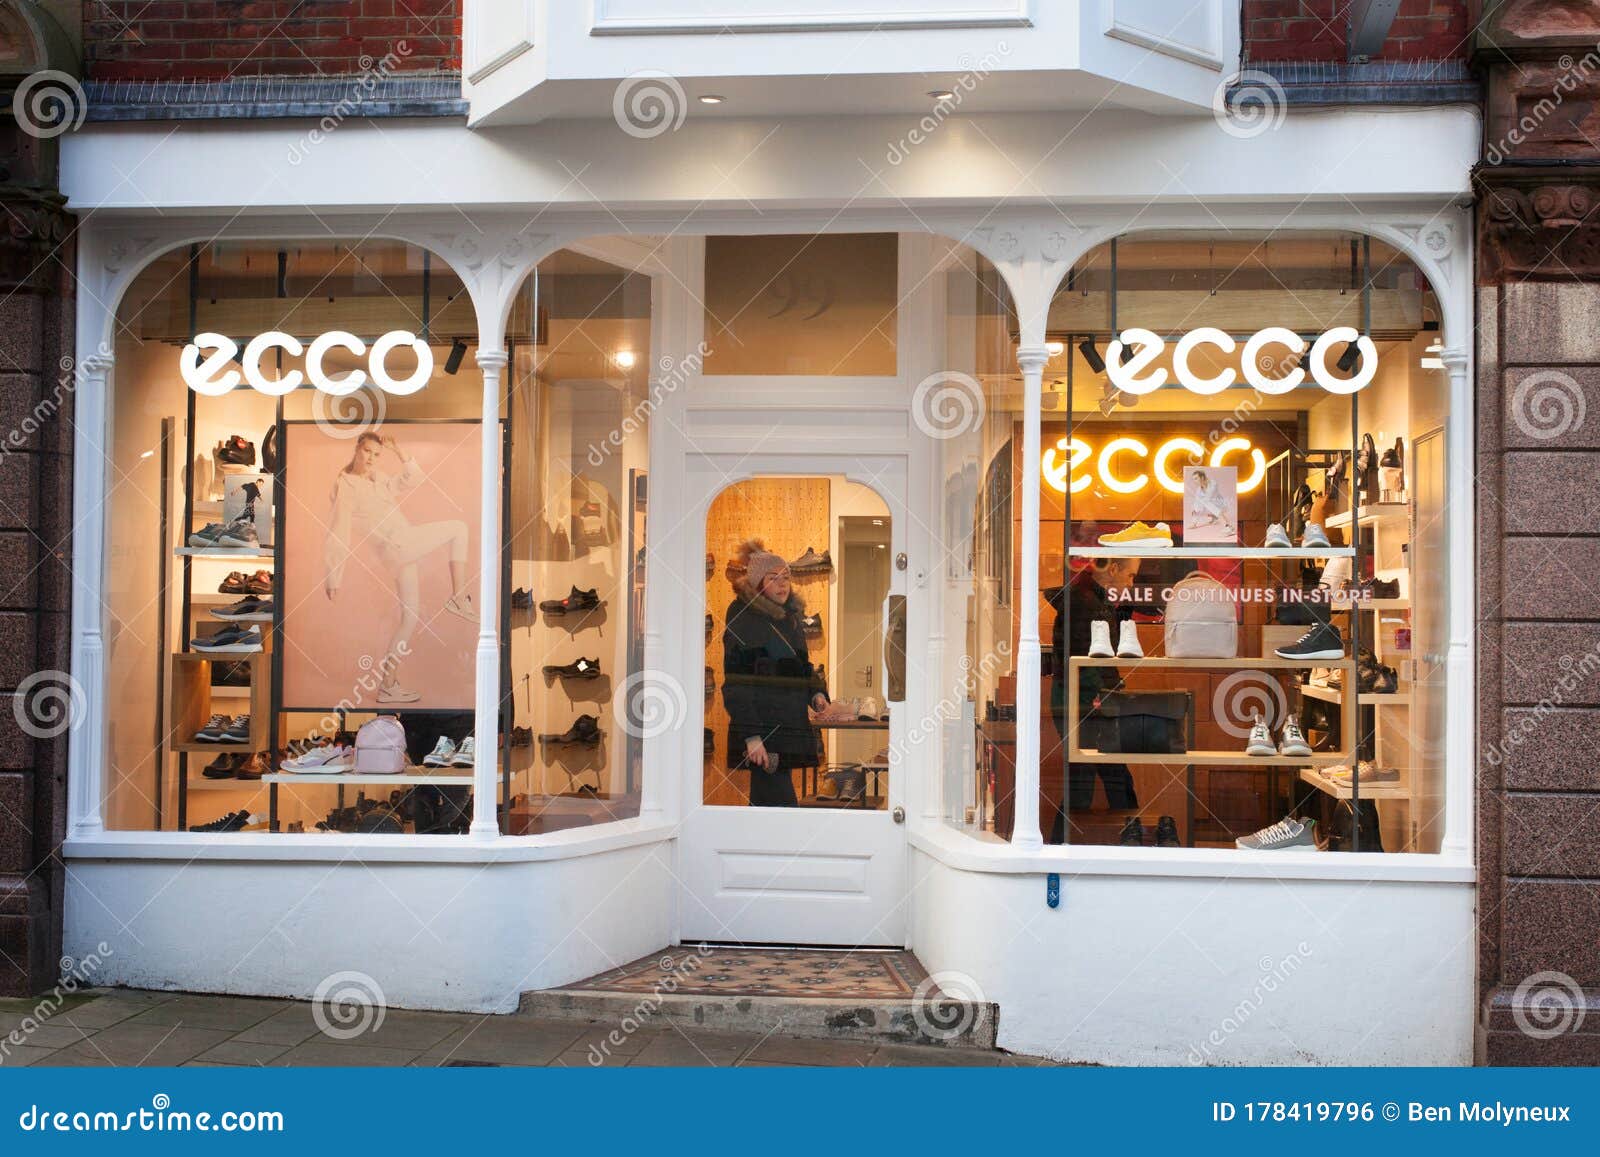 The Shoe Shop Ecco in Winchester, UK Editorial Photo - Image of kingdom, brand: